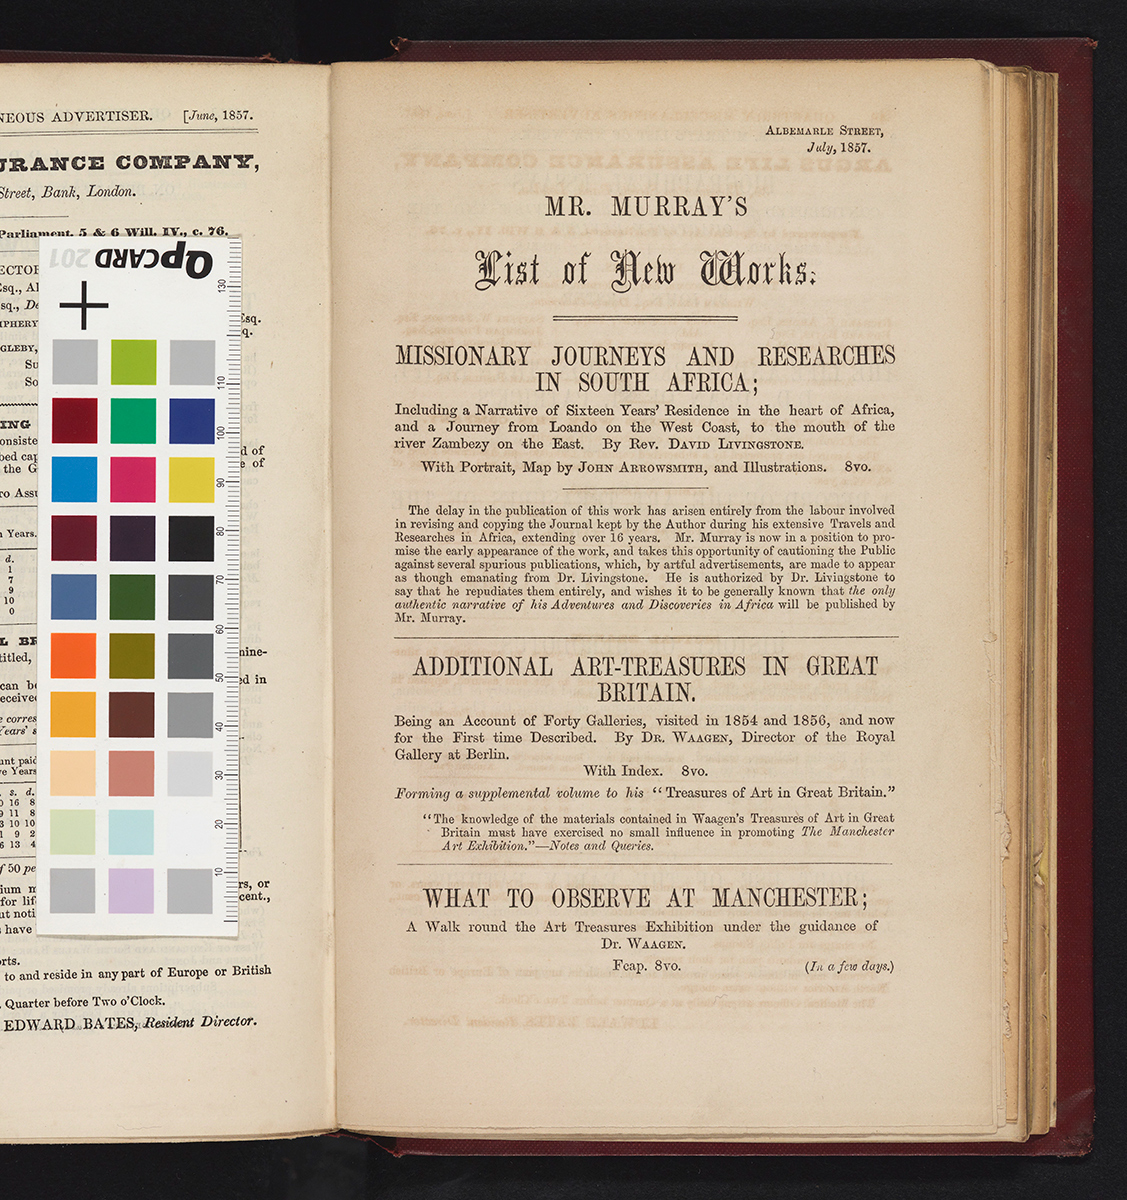 Trade Advert for Mr. Murray's List of New Works: Missionary Journeys and Researches in South Africa, Quarterly Review, 102 (July 1857-October 1857): July 1857, 1. Copyright National Library of Scotland. Creative Commons Share-alike 2.5 UK: Scotland (https://creativecommons.org/licenses/by-nc-sa/2.5/scotland/).